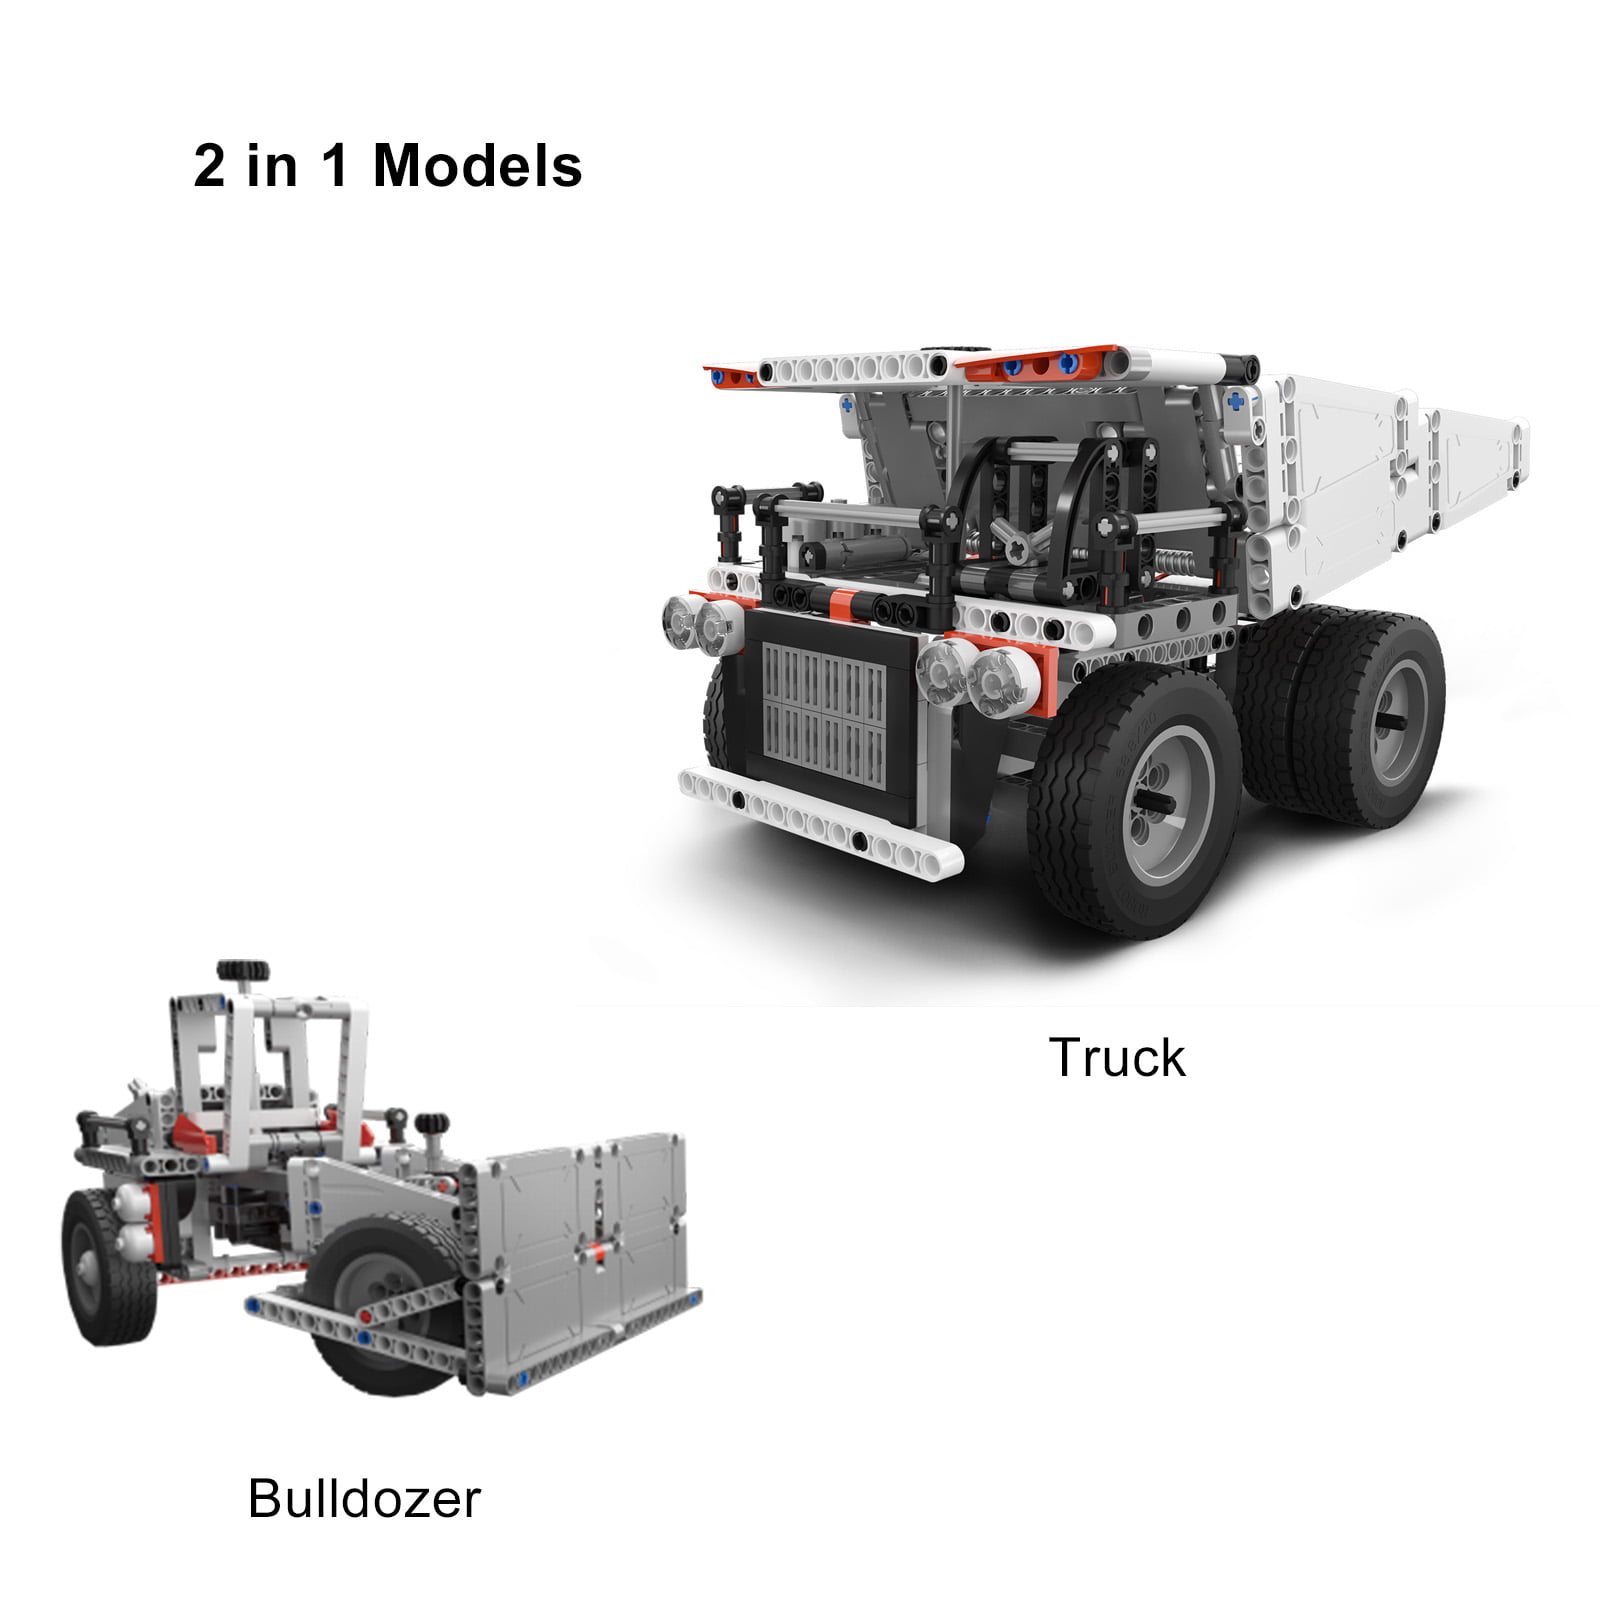 Xiaomi Mi Truck Builder Building Kit Toys for Boys & Girls 2-in-1 Model 535 Pieces 